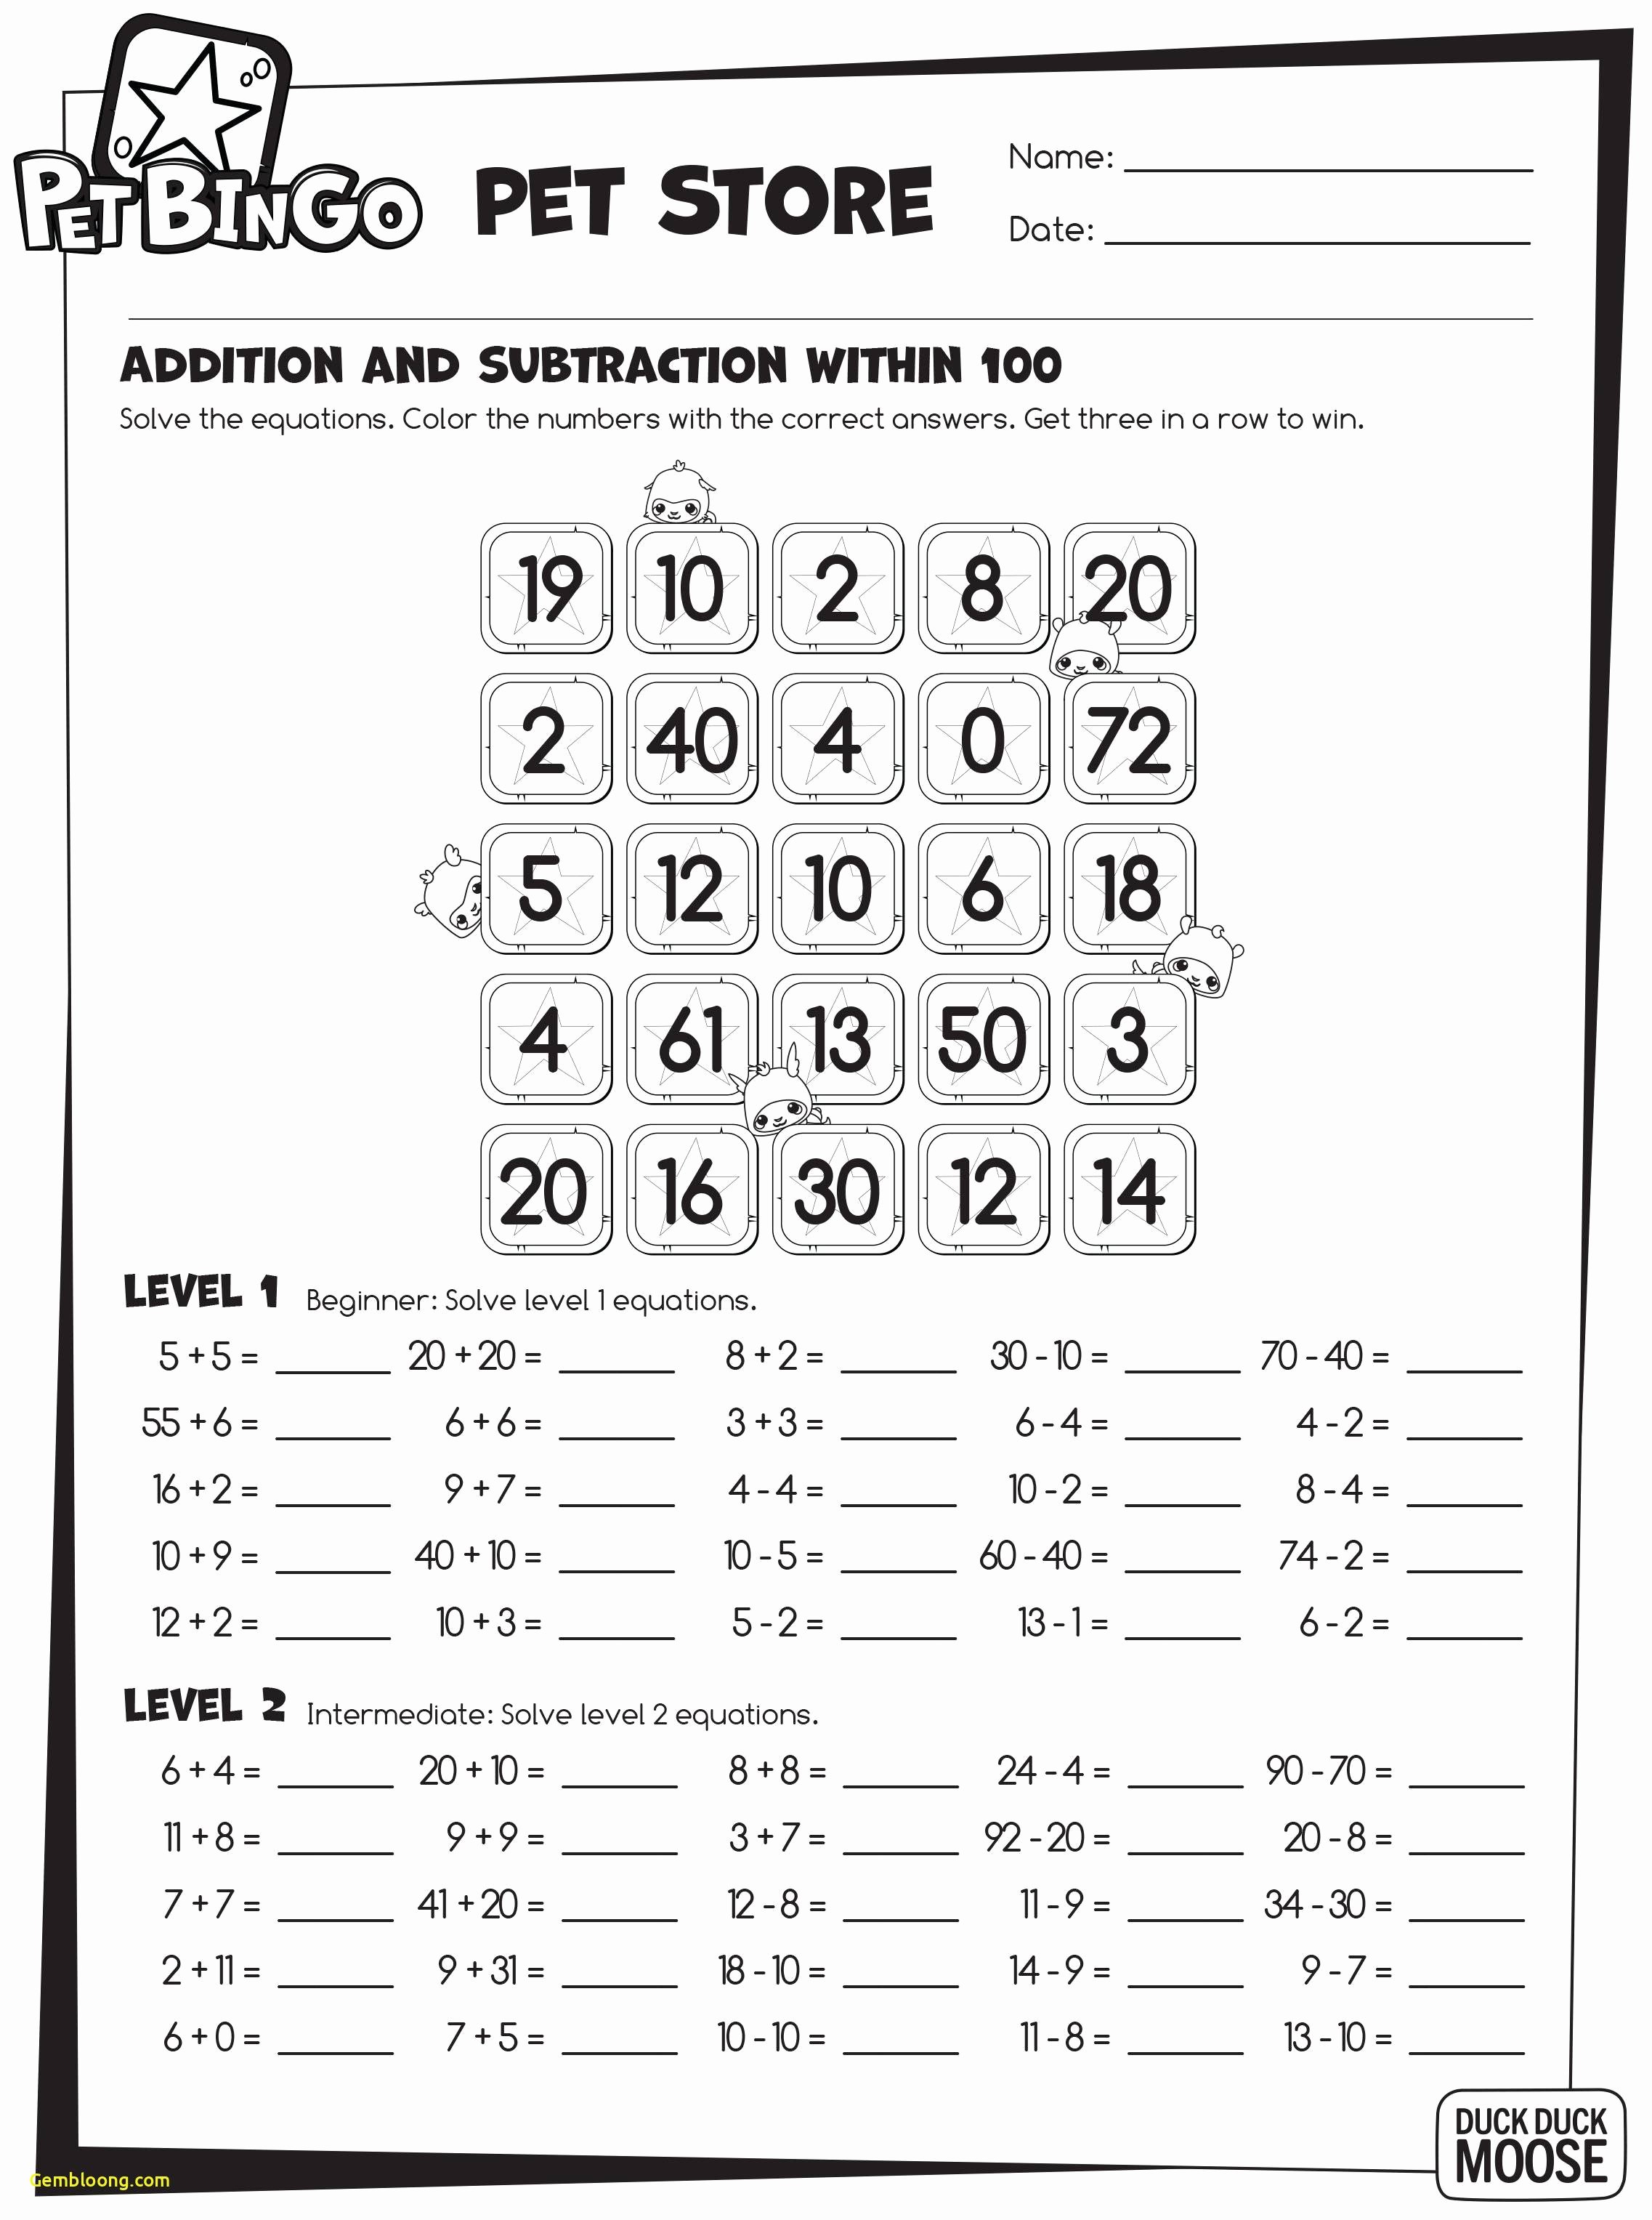 Graphing Quadratics Worksheet Answers Lovely Graphing Quadratics Review Worksheet Answers